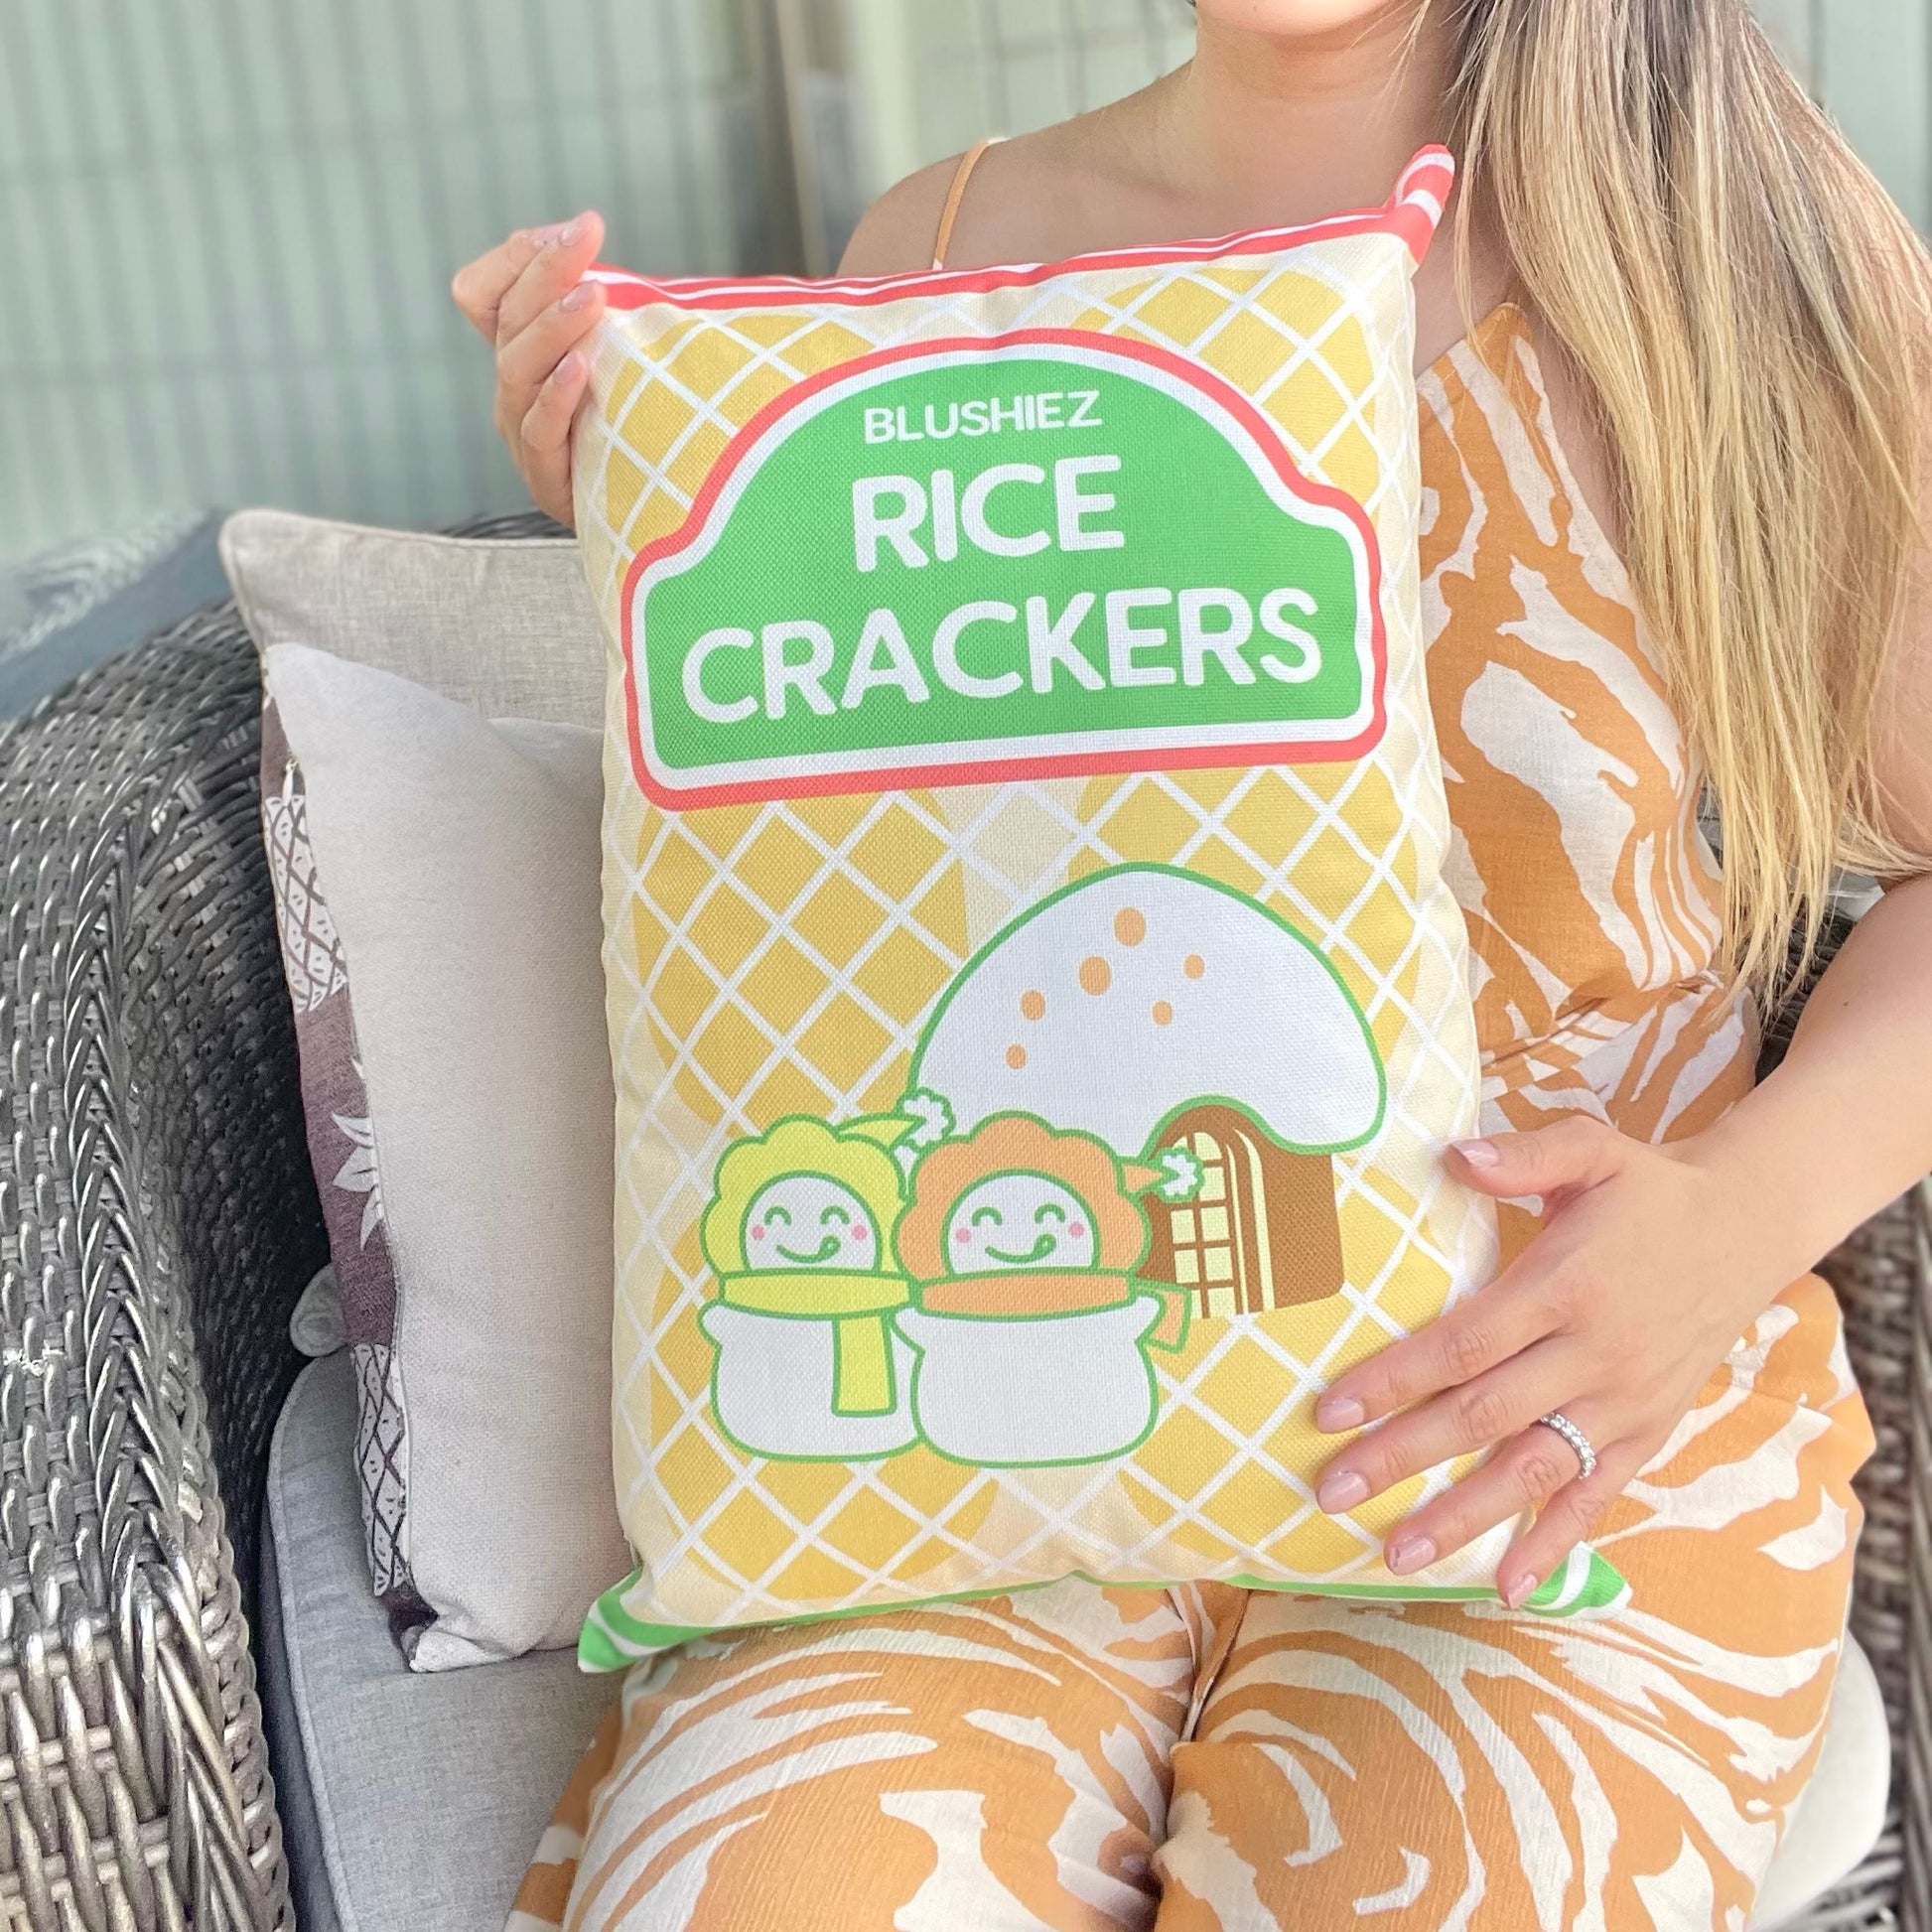 Pillow with a festive snack-inspired design, held by a woman in her lap. The pillow features a light orange background resembling rice crackers, with orange stripes at the top and green stripes at the bottom. The design includes a charming scene of two snowmen in front of a house with a snowy roof, evoking a festive and wintery atmosphere.